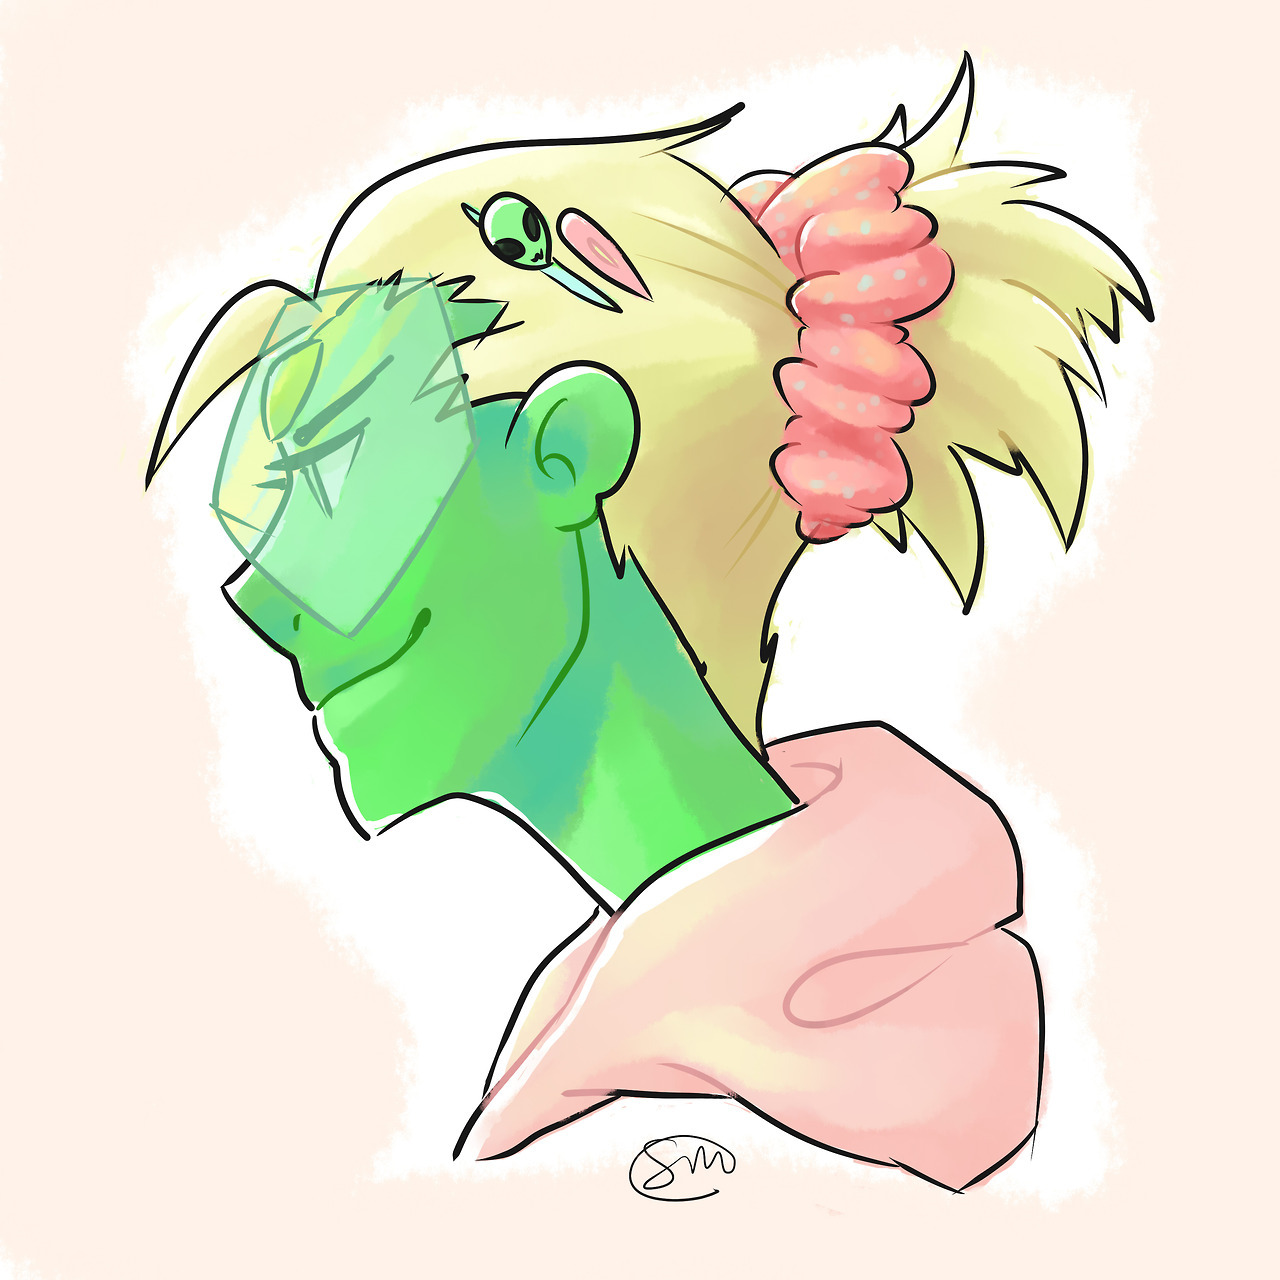 I thought it would be cute to draw peridot with her hair in a ponytail, and she definitely does look adorable!